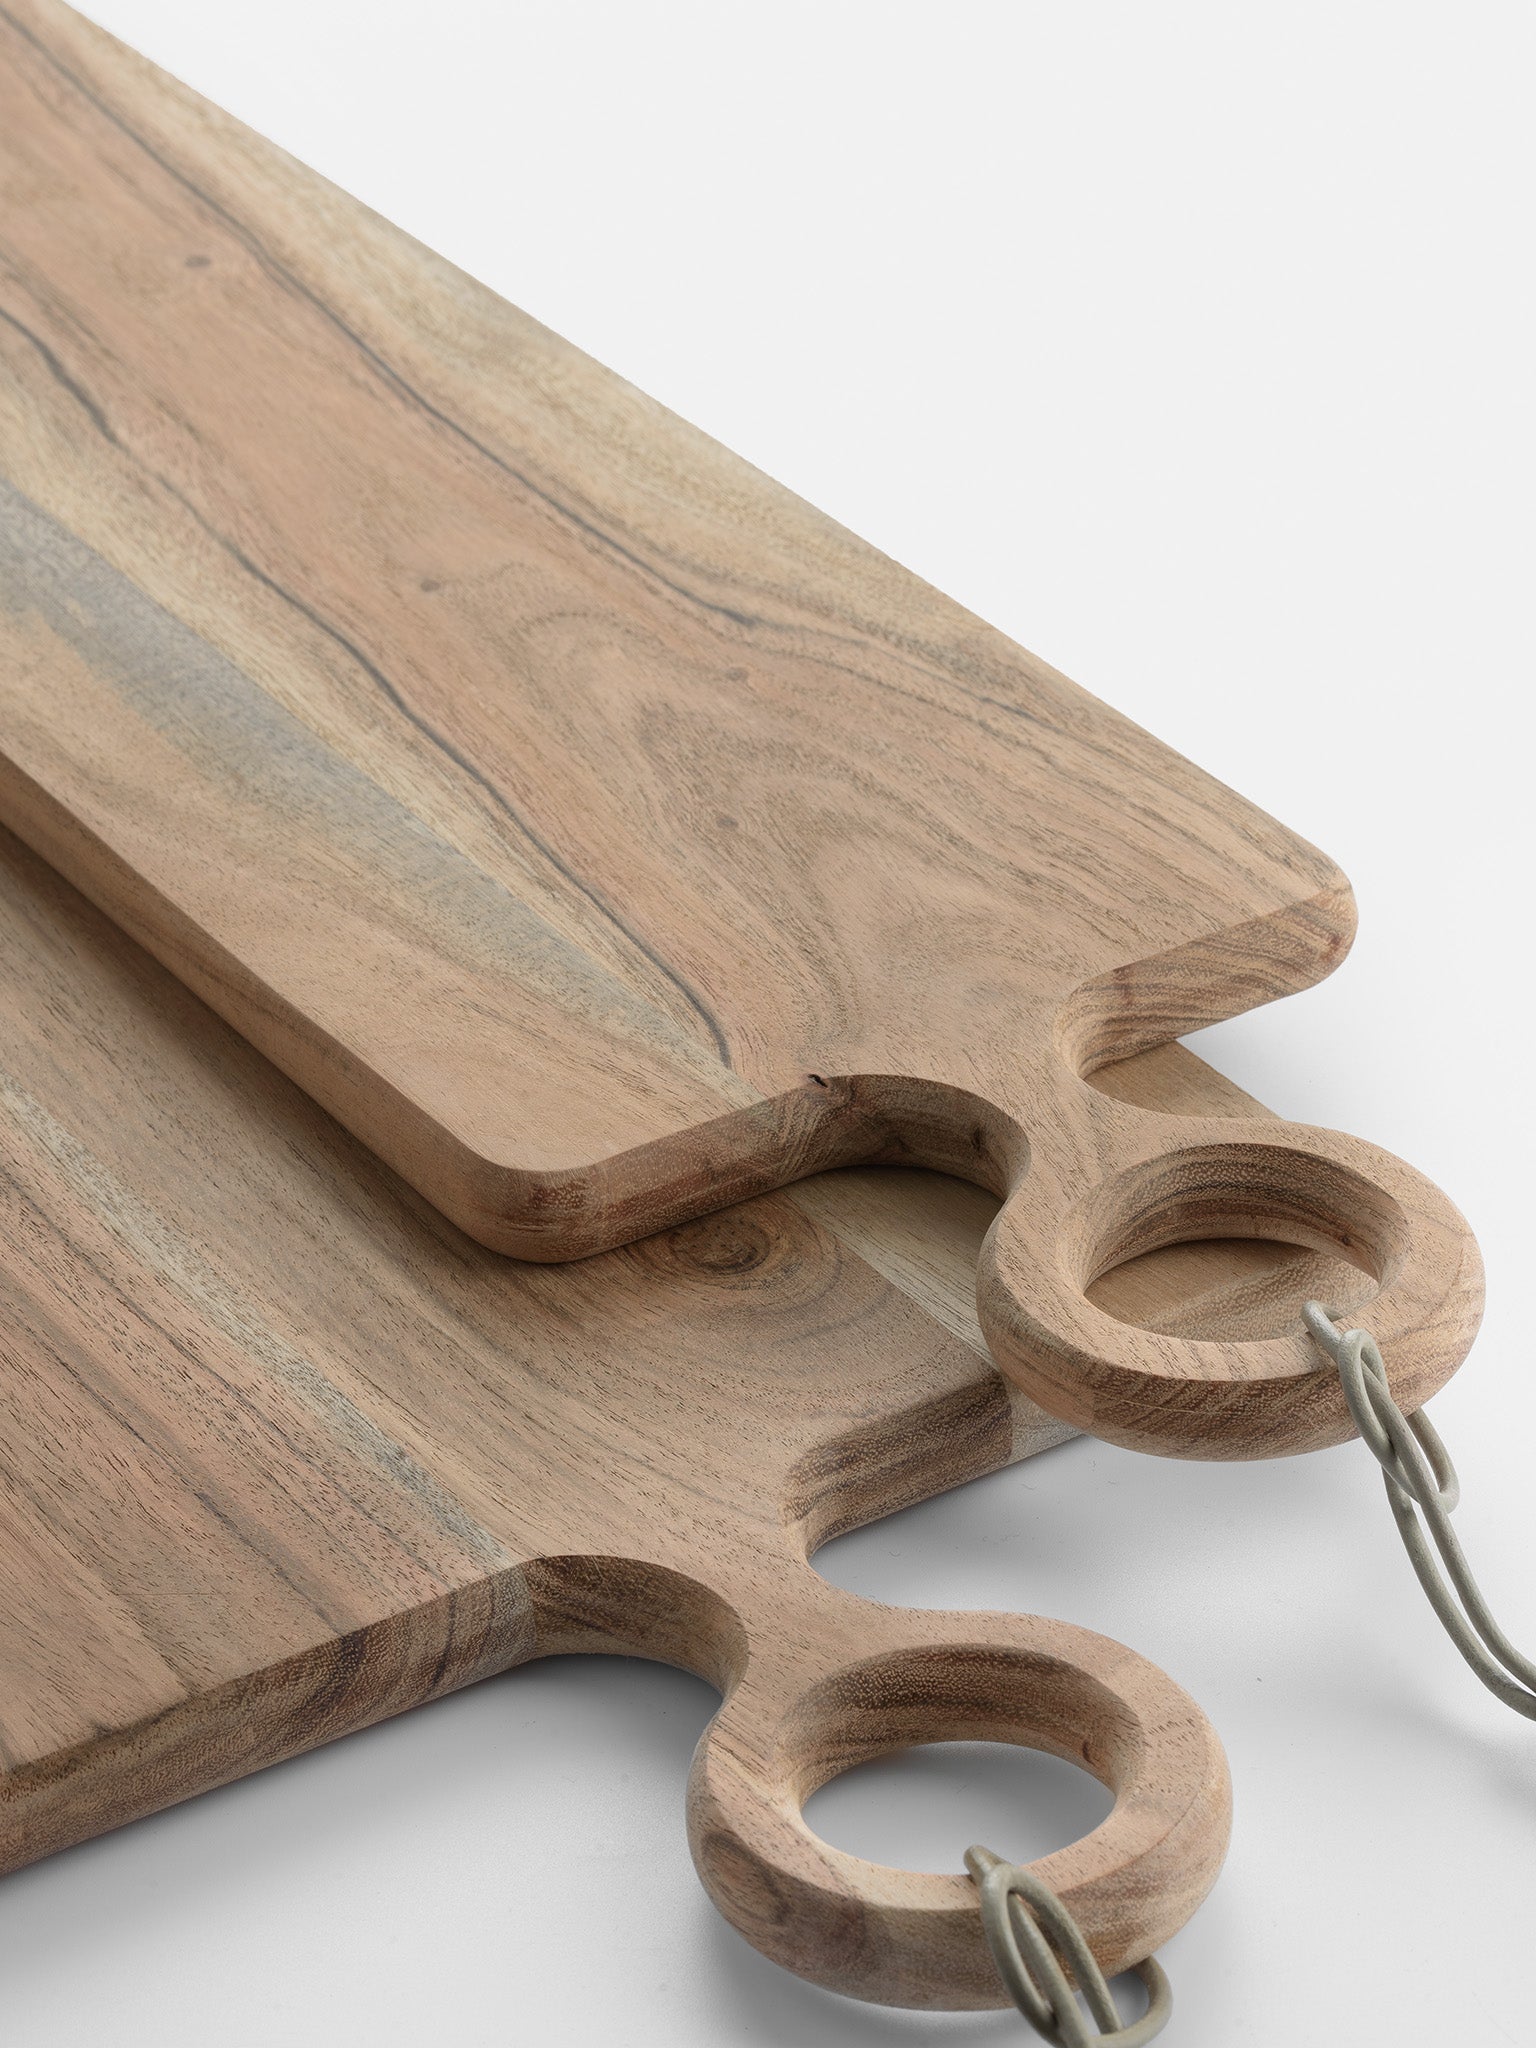 Wooden chopping board with handle